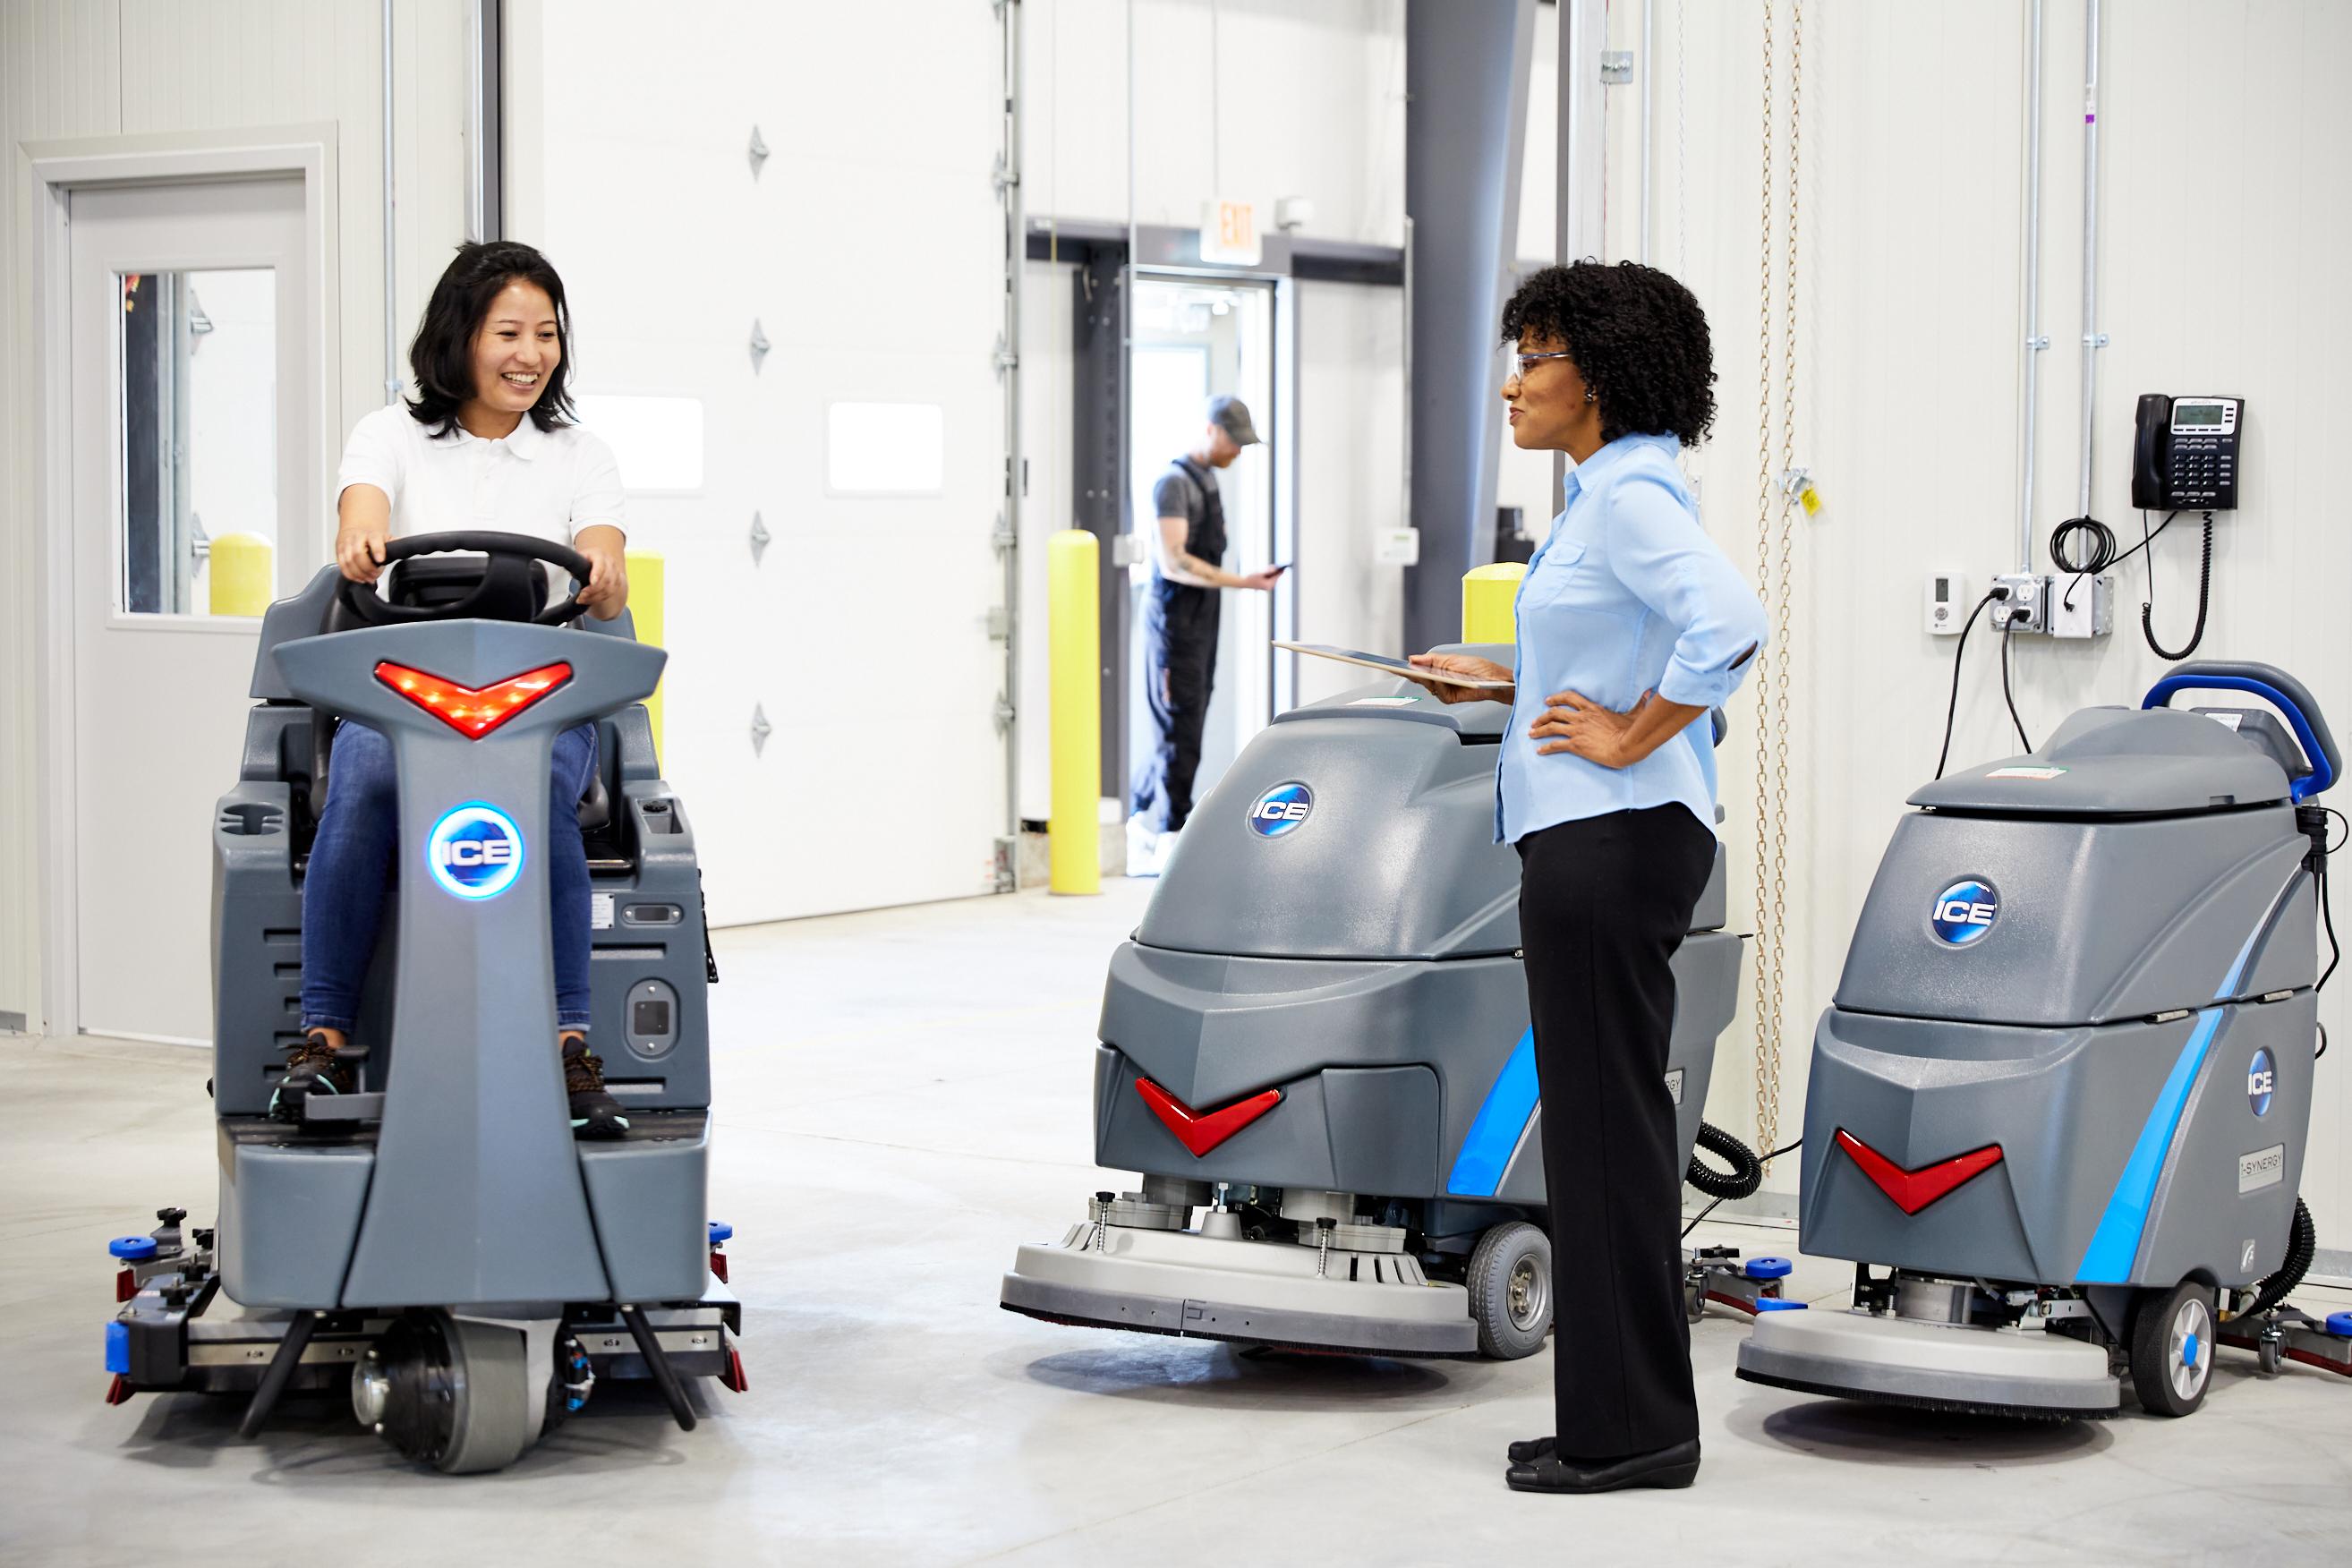 Two co-workers using ICE Cobotics intelligent cleaning equipment in manufacturing facility